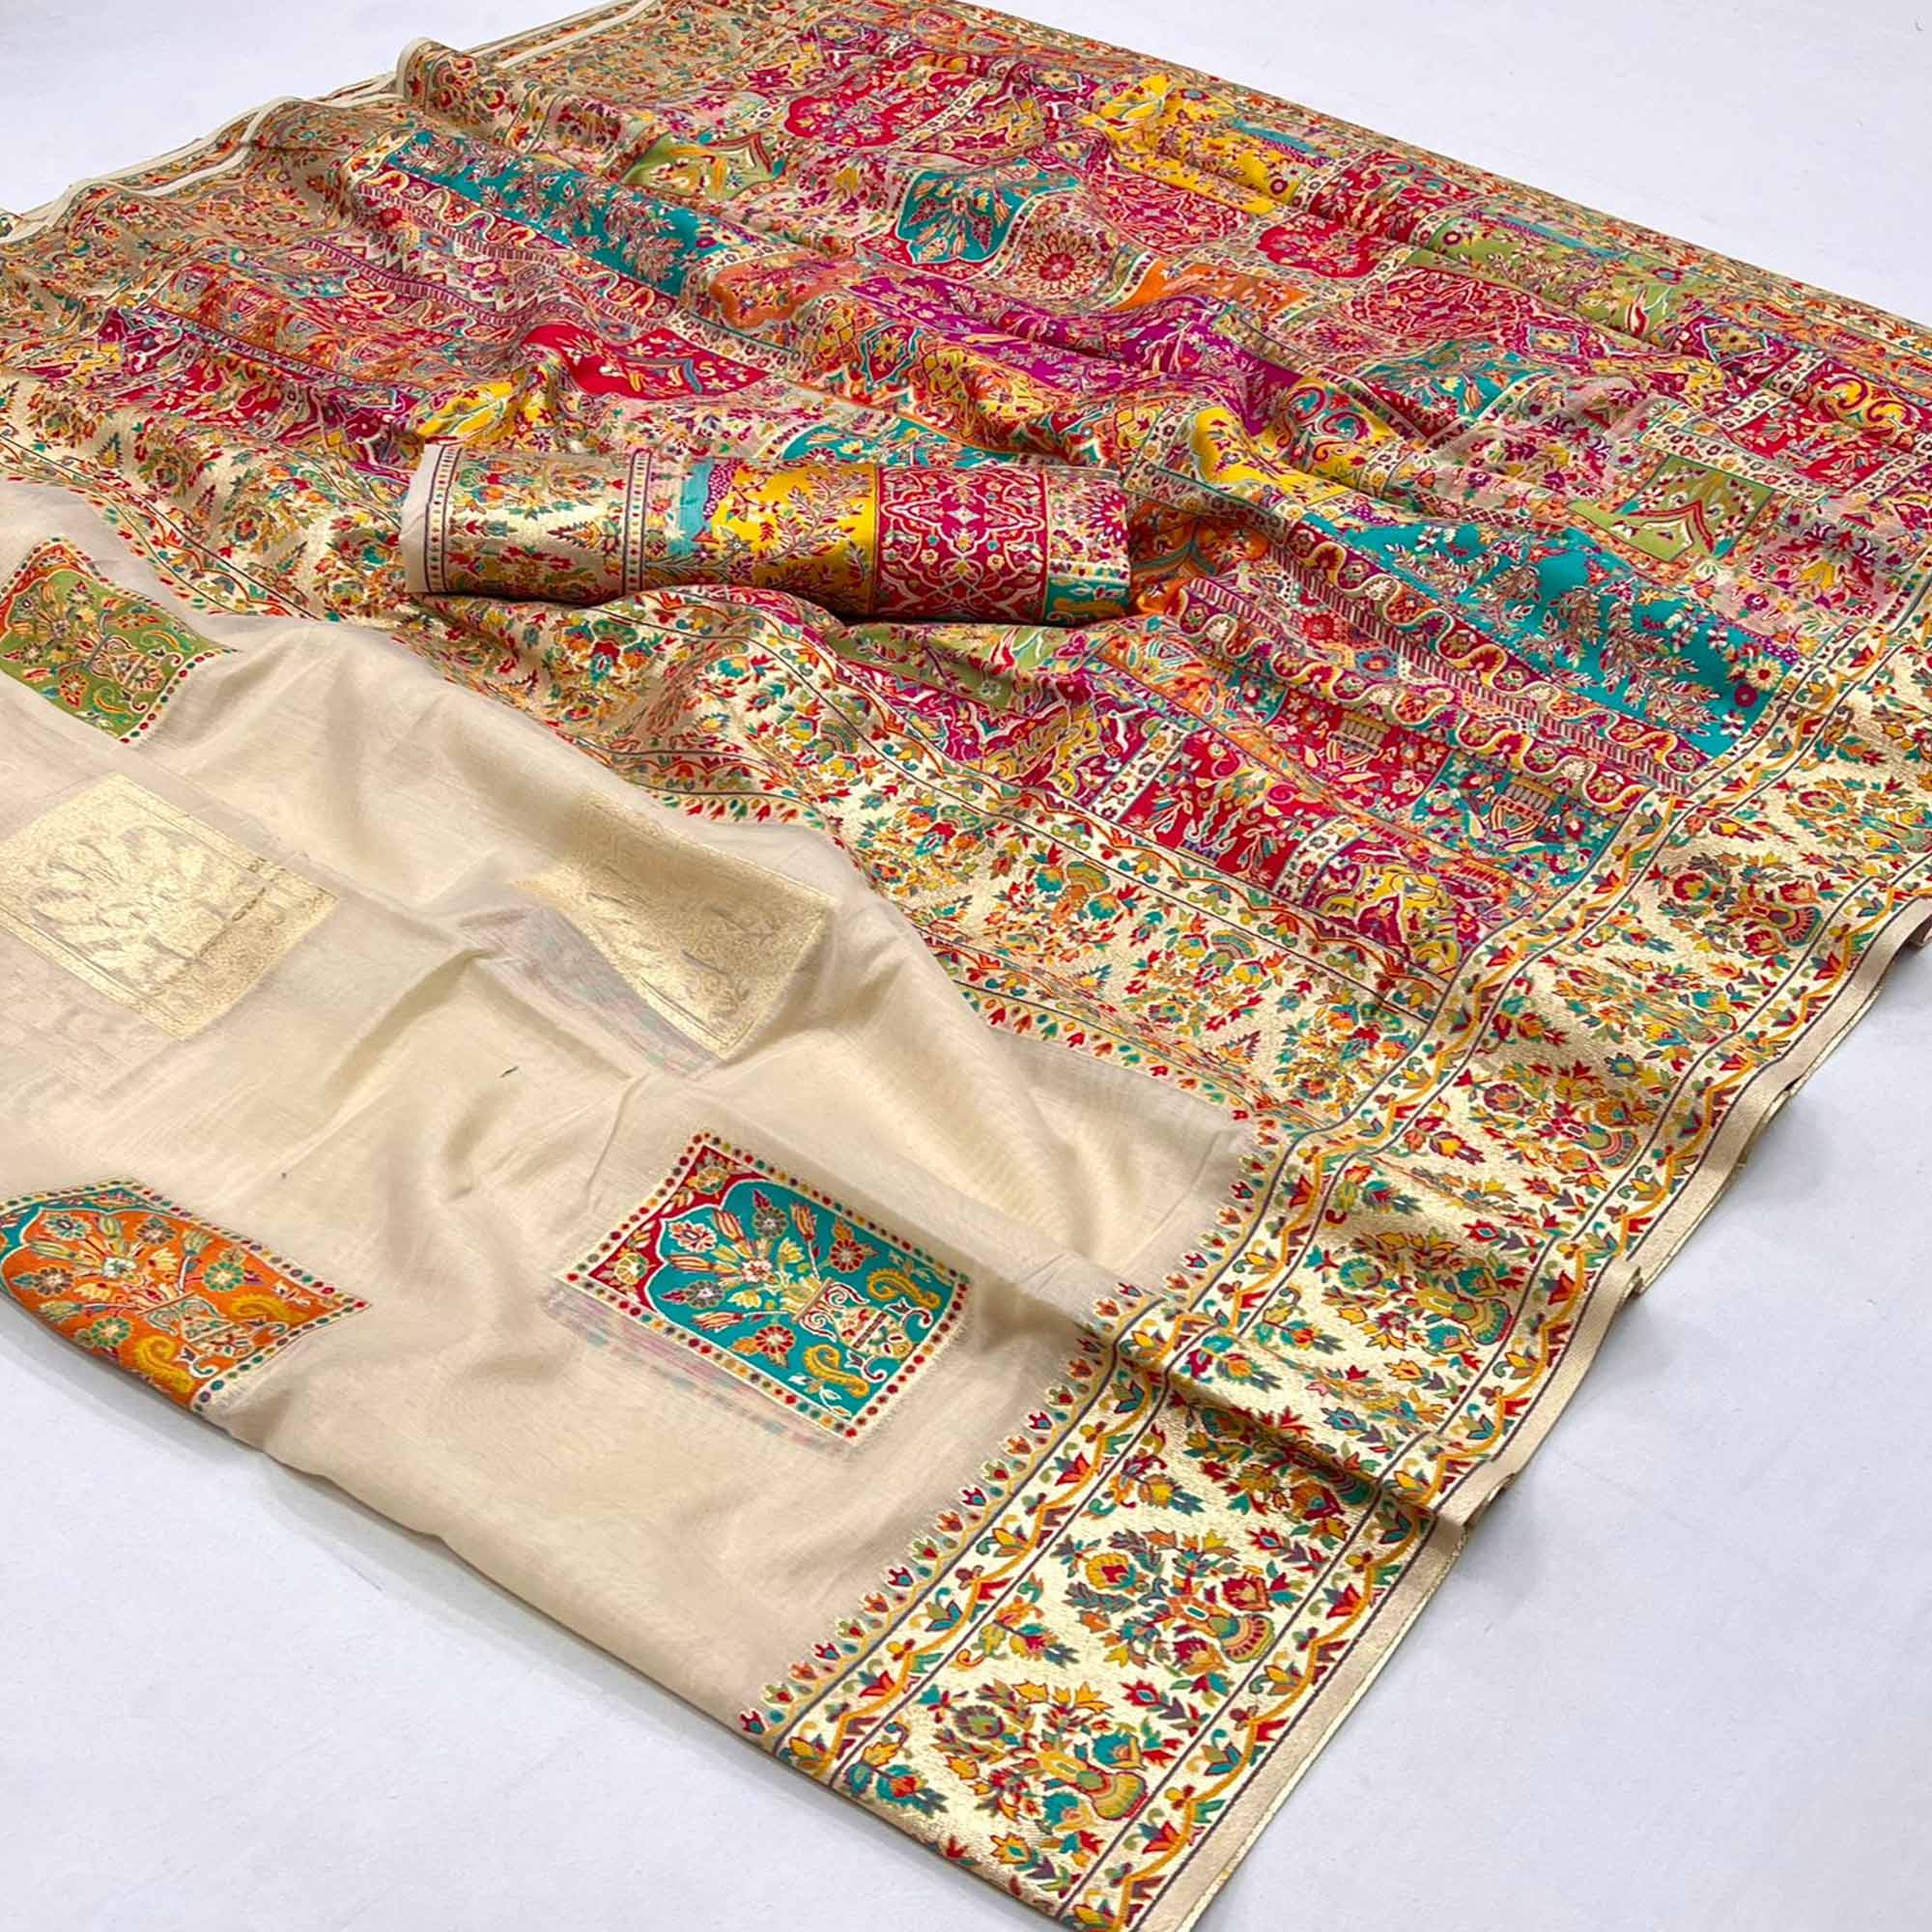 Off White Floral Embroidered Woven Chanderi Silk Saree